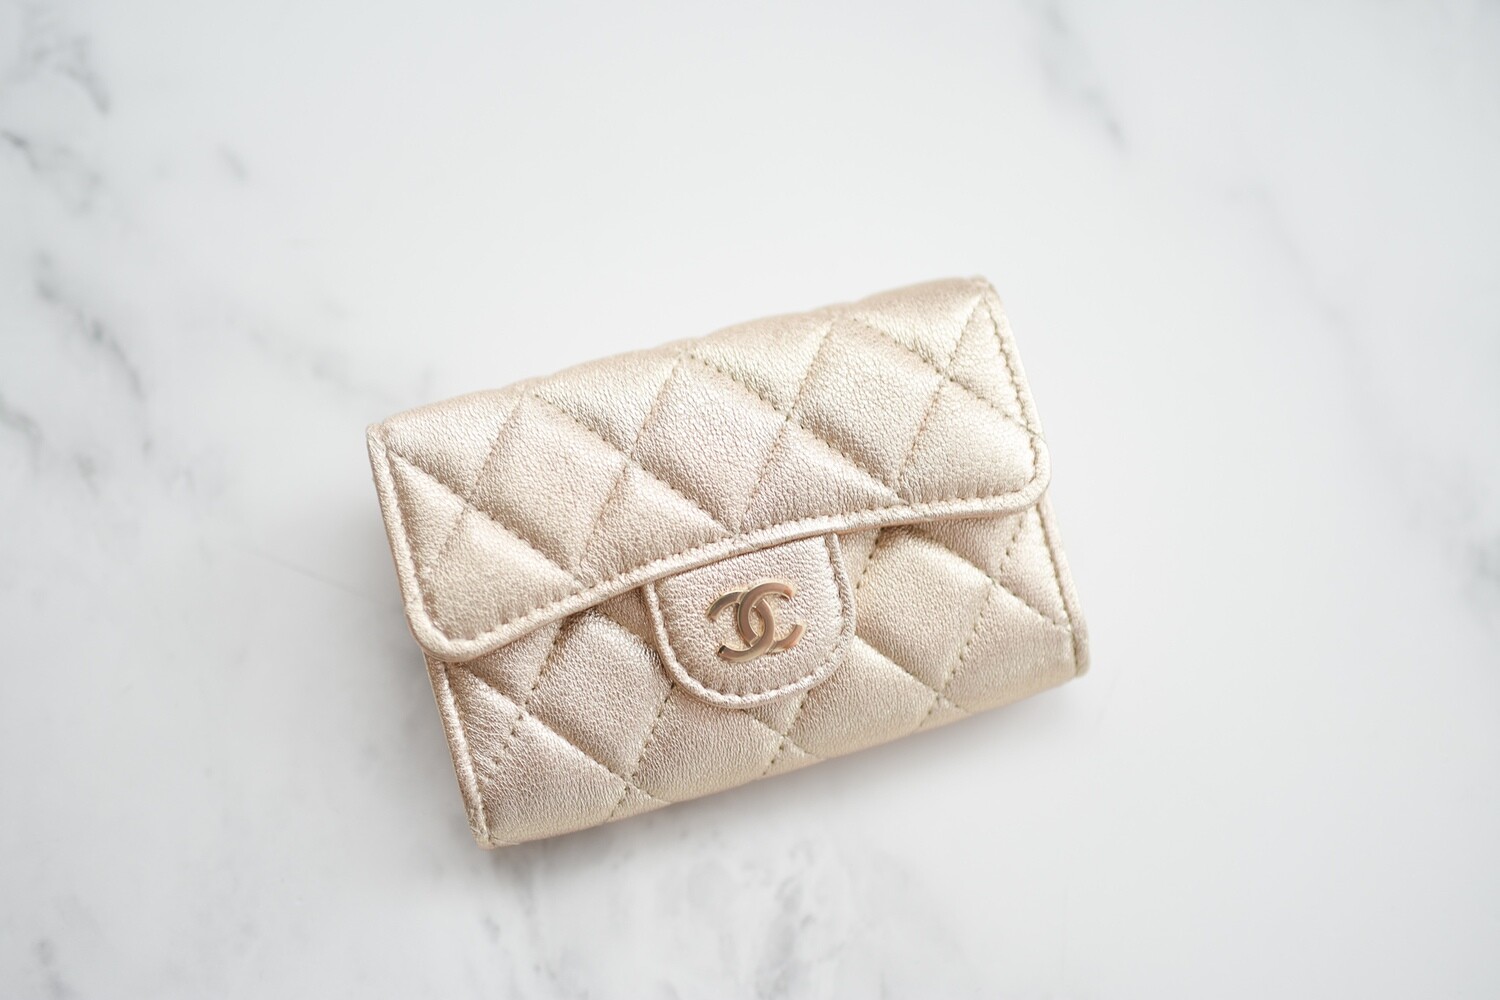 Chanel Classic Snap Card Holder in Iridescent Grey Leather and SHW – Brands  Lover